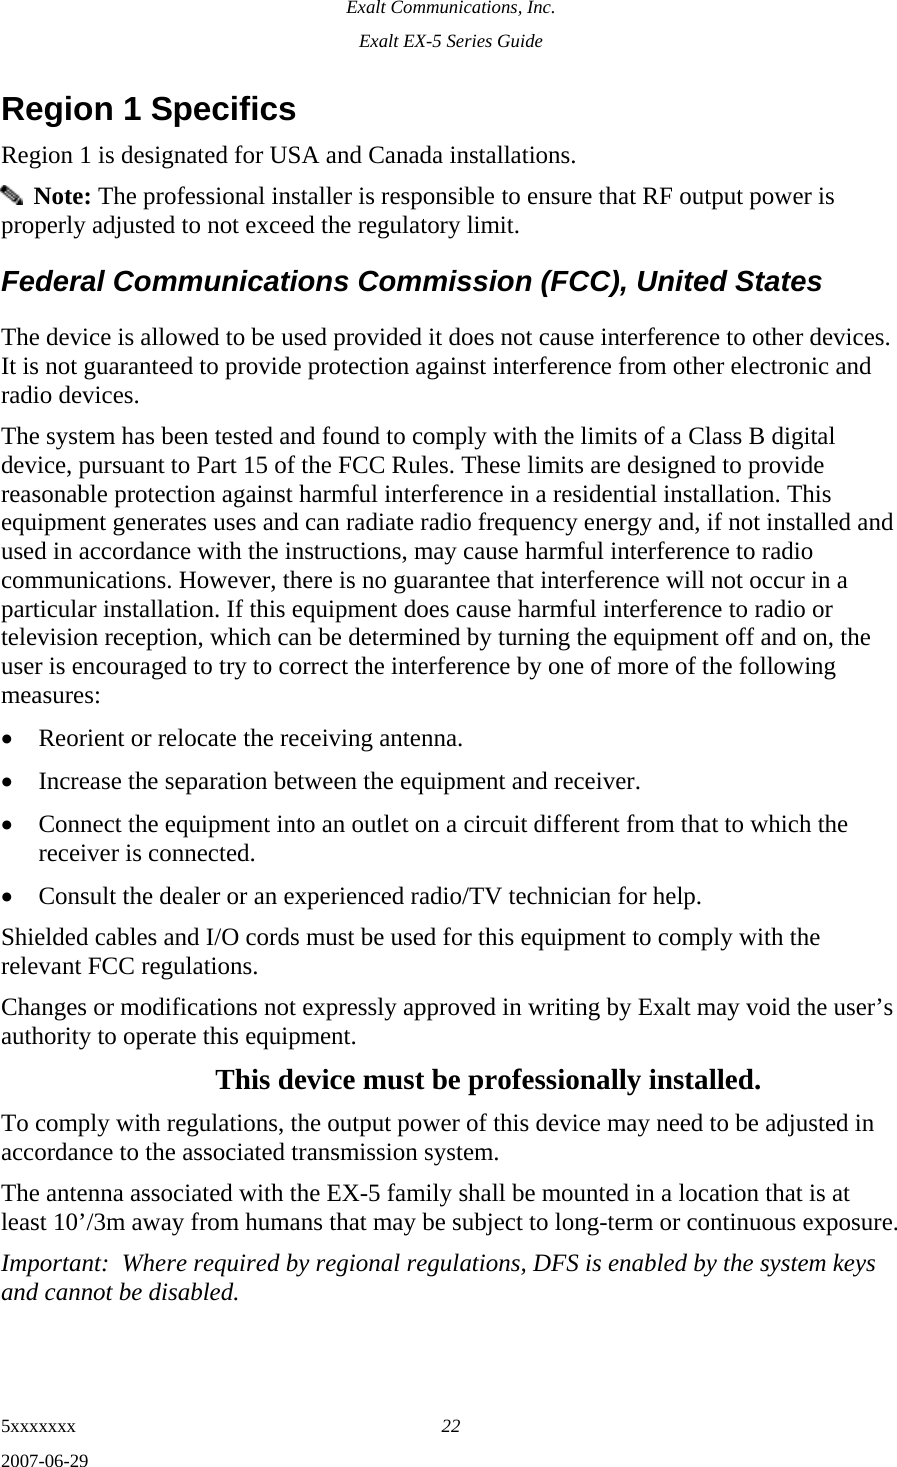 Exalt Communications, Inc. Exalt EX-5 Series Guide 5xxxxxxx  22 2007-06-29 Region 1 Specifics Region 1 is designated for USA and Canada installations.   Note: The professional installer is responsible to ensure that RF output power is properly adjusted to not exceed the regulatory limit. Federal Communications Commission (FCC), United States The device is allowed to be used provided it does not cause interference to other devices. It is not guaranteed to provide protection against interference from other electronic and radio devices. The system has been tested and found to comply with the limits of a Class B digital device, pursuant to Part 15 of the FCC Rules. These limits are designed to provide reasonable protection against harmful interference in a residential installation. This equipment generates uses and can radiate radio frequency energy and, if not installed and used in accordance with the instructions, may cause harmful interference to radio communications. However, there is no guarantee that interference will not occur in a particular installation. If this equipment does cause harmful interference to radio or television reception, which can be determined by turning the equipment off and on, the user is encouraged to try to correct the interference by one of more of the following measures: • Reorient or relocate the receiving antenna. • Increase the separation between the equipment and receiver. • Connect the equipment into an outlet on a circuit different from that to which the receiver is connected. • Consult the dealer or an experienced radio/TV technician for help. Shielded cables and I/O cords must be used for this equipment to comply with the relevant FCC regulations. Changes or modifications not expressly approved in writing by Exalt may void the user’s authority to operate this equipment. This device must be professionally installed. To comply with regulations, the output power of this device may need to be adjusted in accordance to the associated transmission system.  The antenna associated with the EX-5 family shall be mounted in a location that is at least 10’/3m away from humans that may be subject to long-term or continuous exposure. Important:  Where required by regional regulations, DFS is enabled by the system keys and cannot be disabled. 